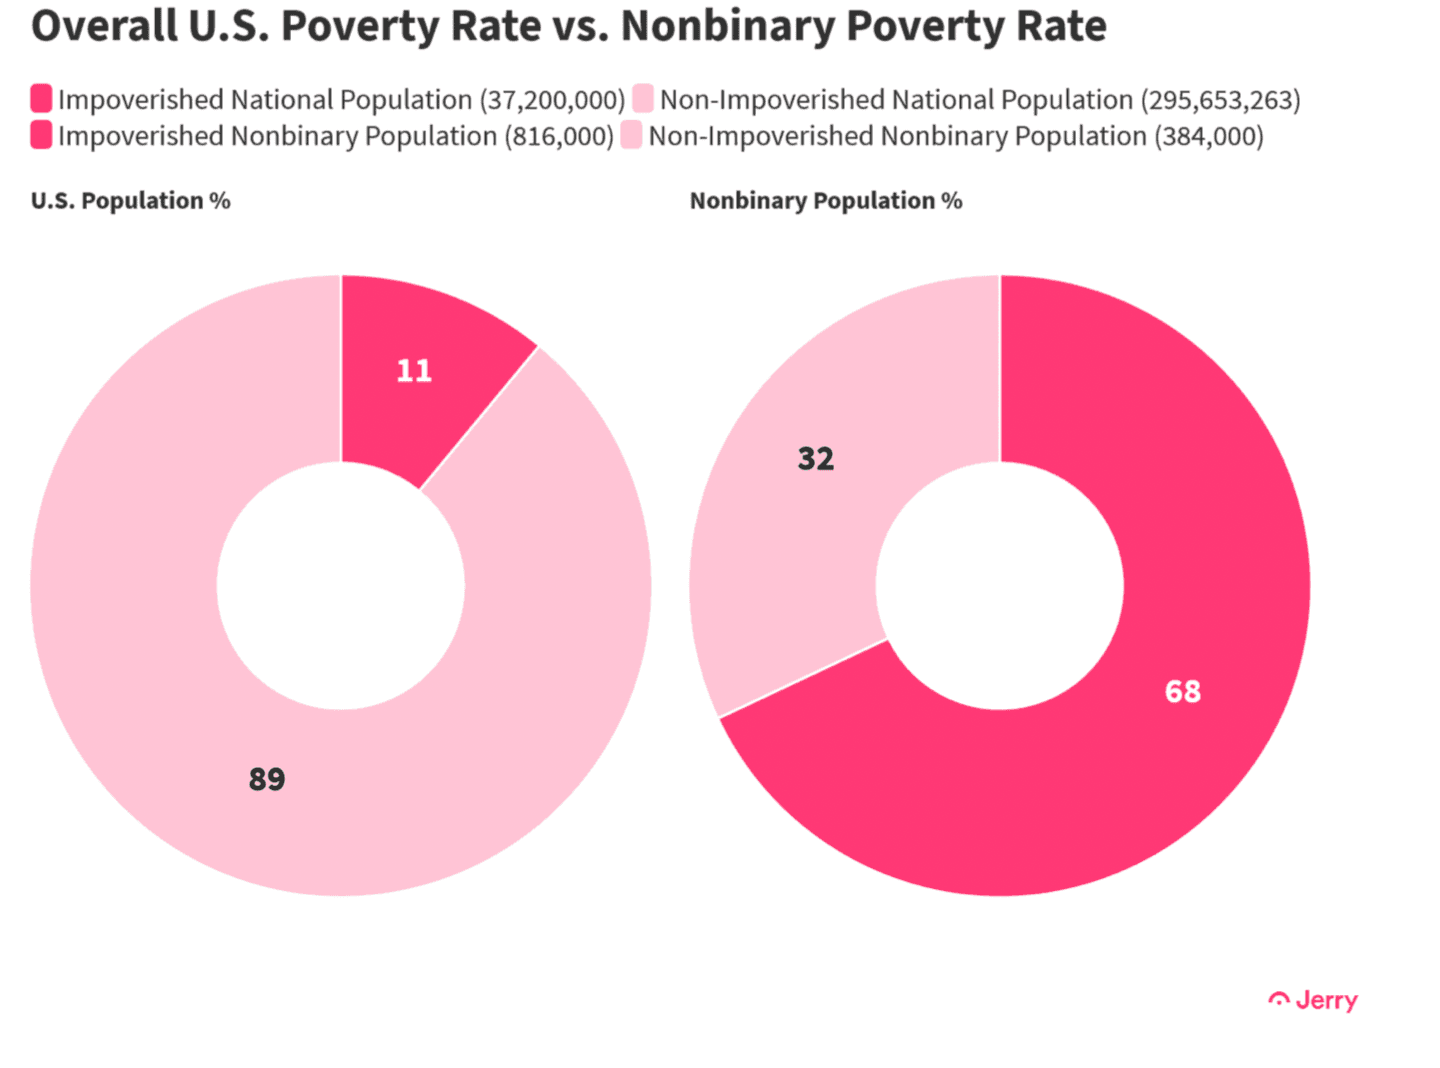 Overall Poverty Rate vs. Nonbinary Poverty Rate